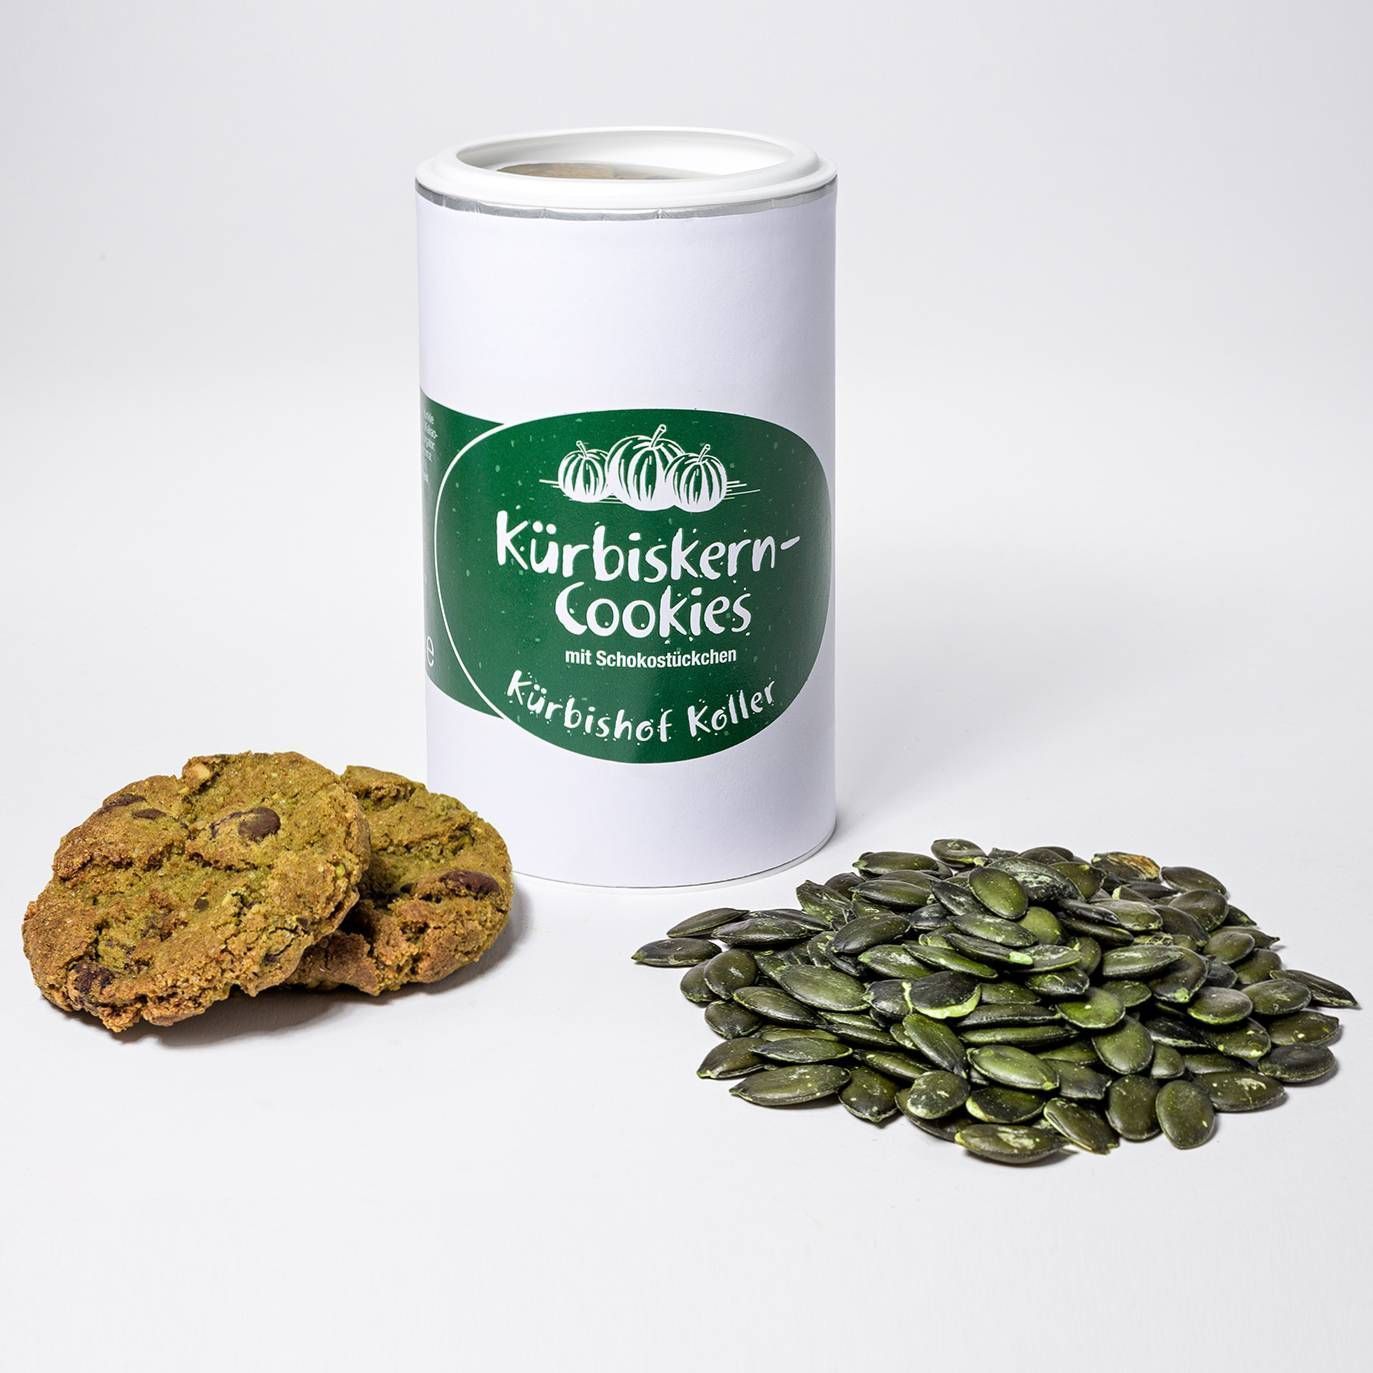 Pumpkin Seed Cookies with Chocolate Chips in Palestine